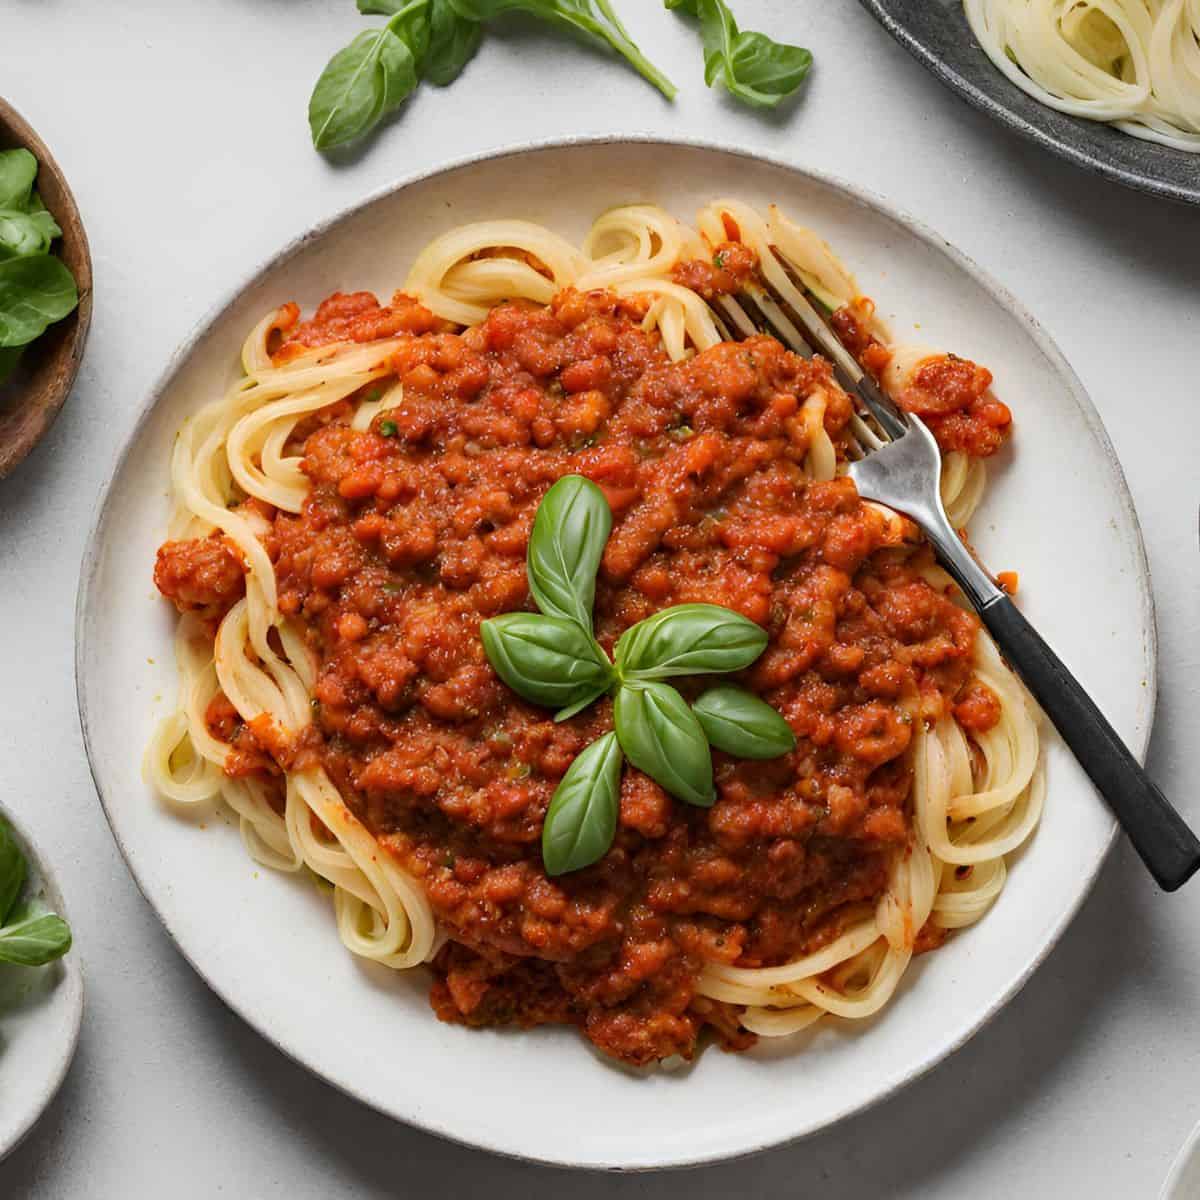 Plate of spaghetti with vegan bolognese sauce on top.